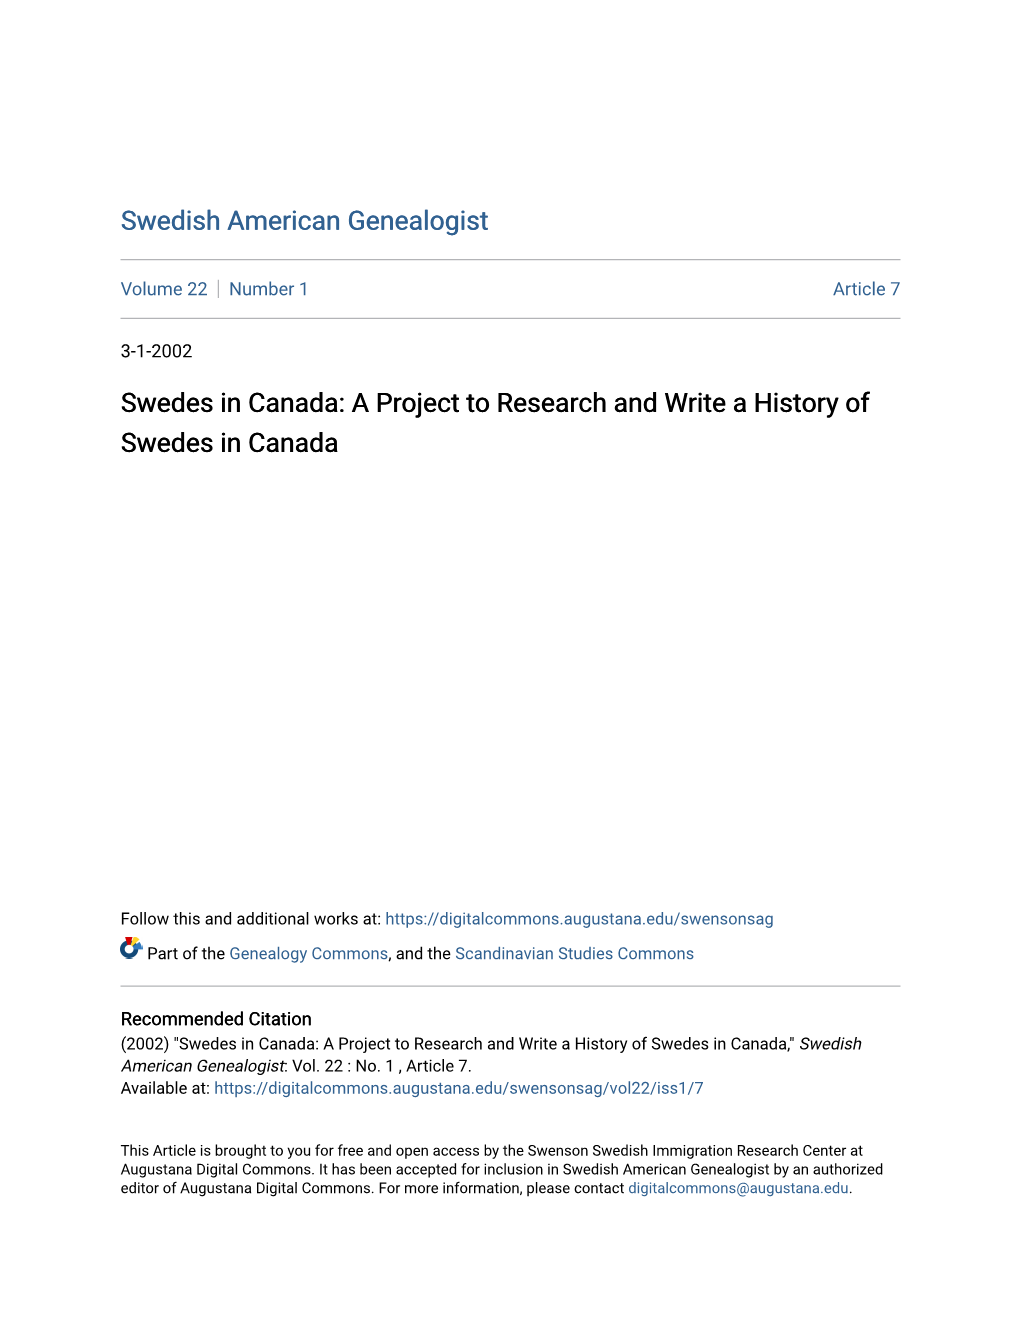 Swedes in Canada: a Project to Research and Write a History of Swedes in Canada